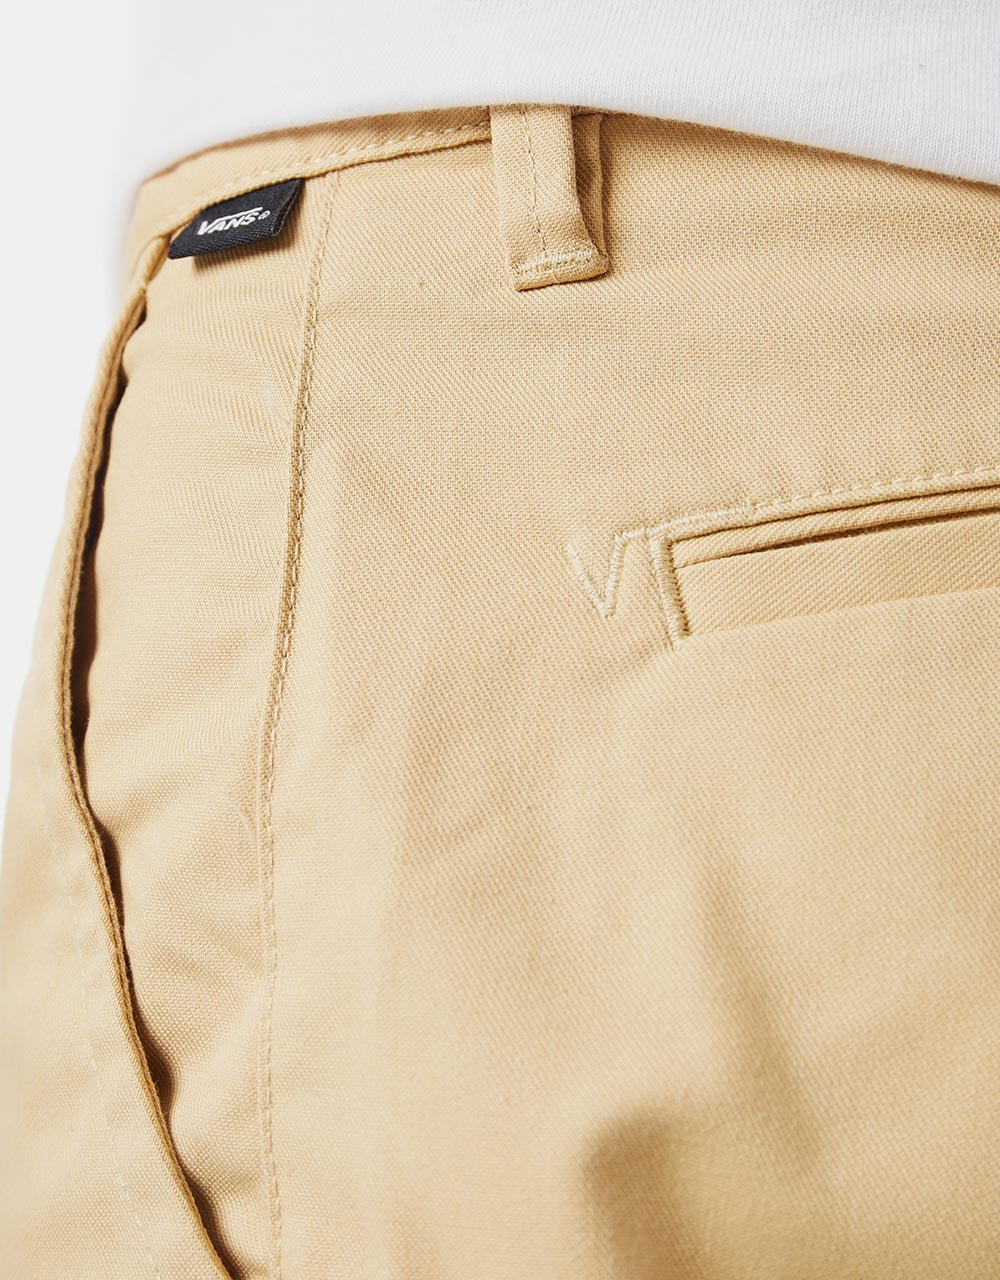 Vans Authentic Relaxed Chino Pant - Taos Taupe